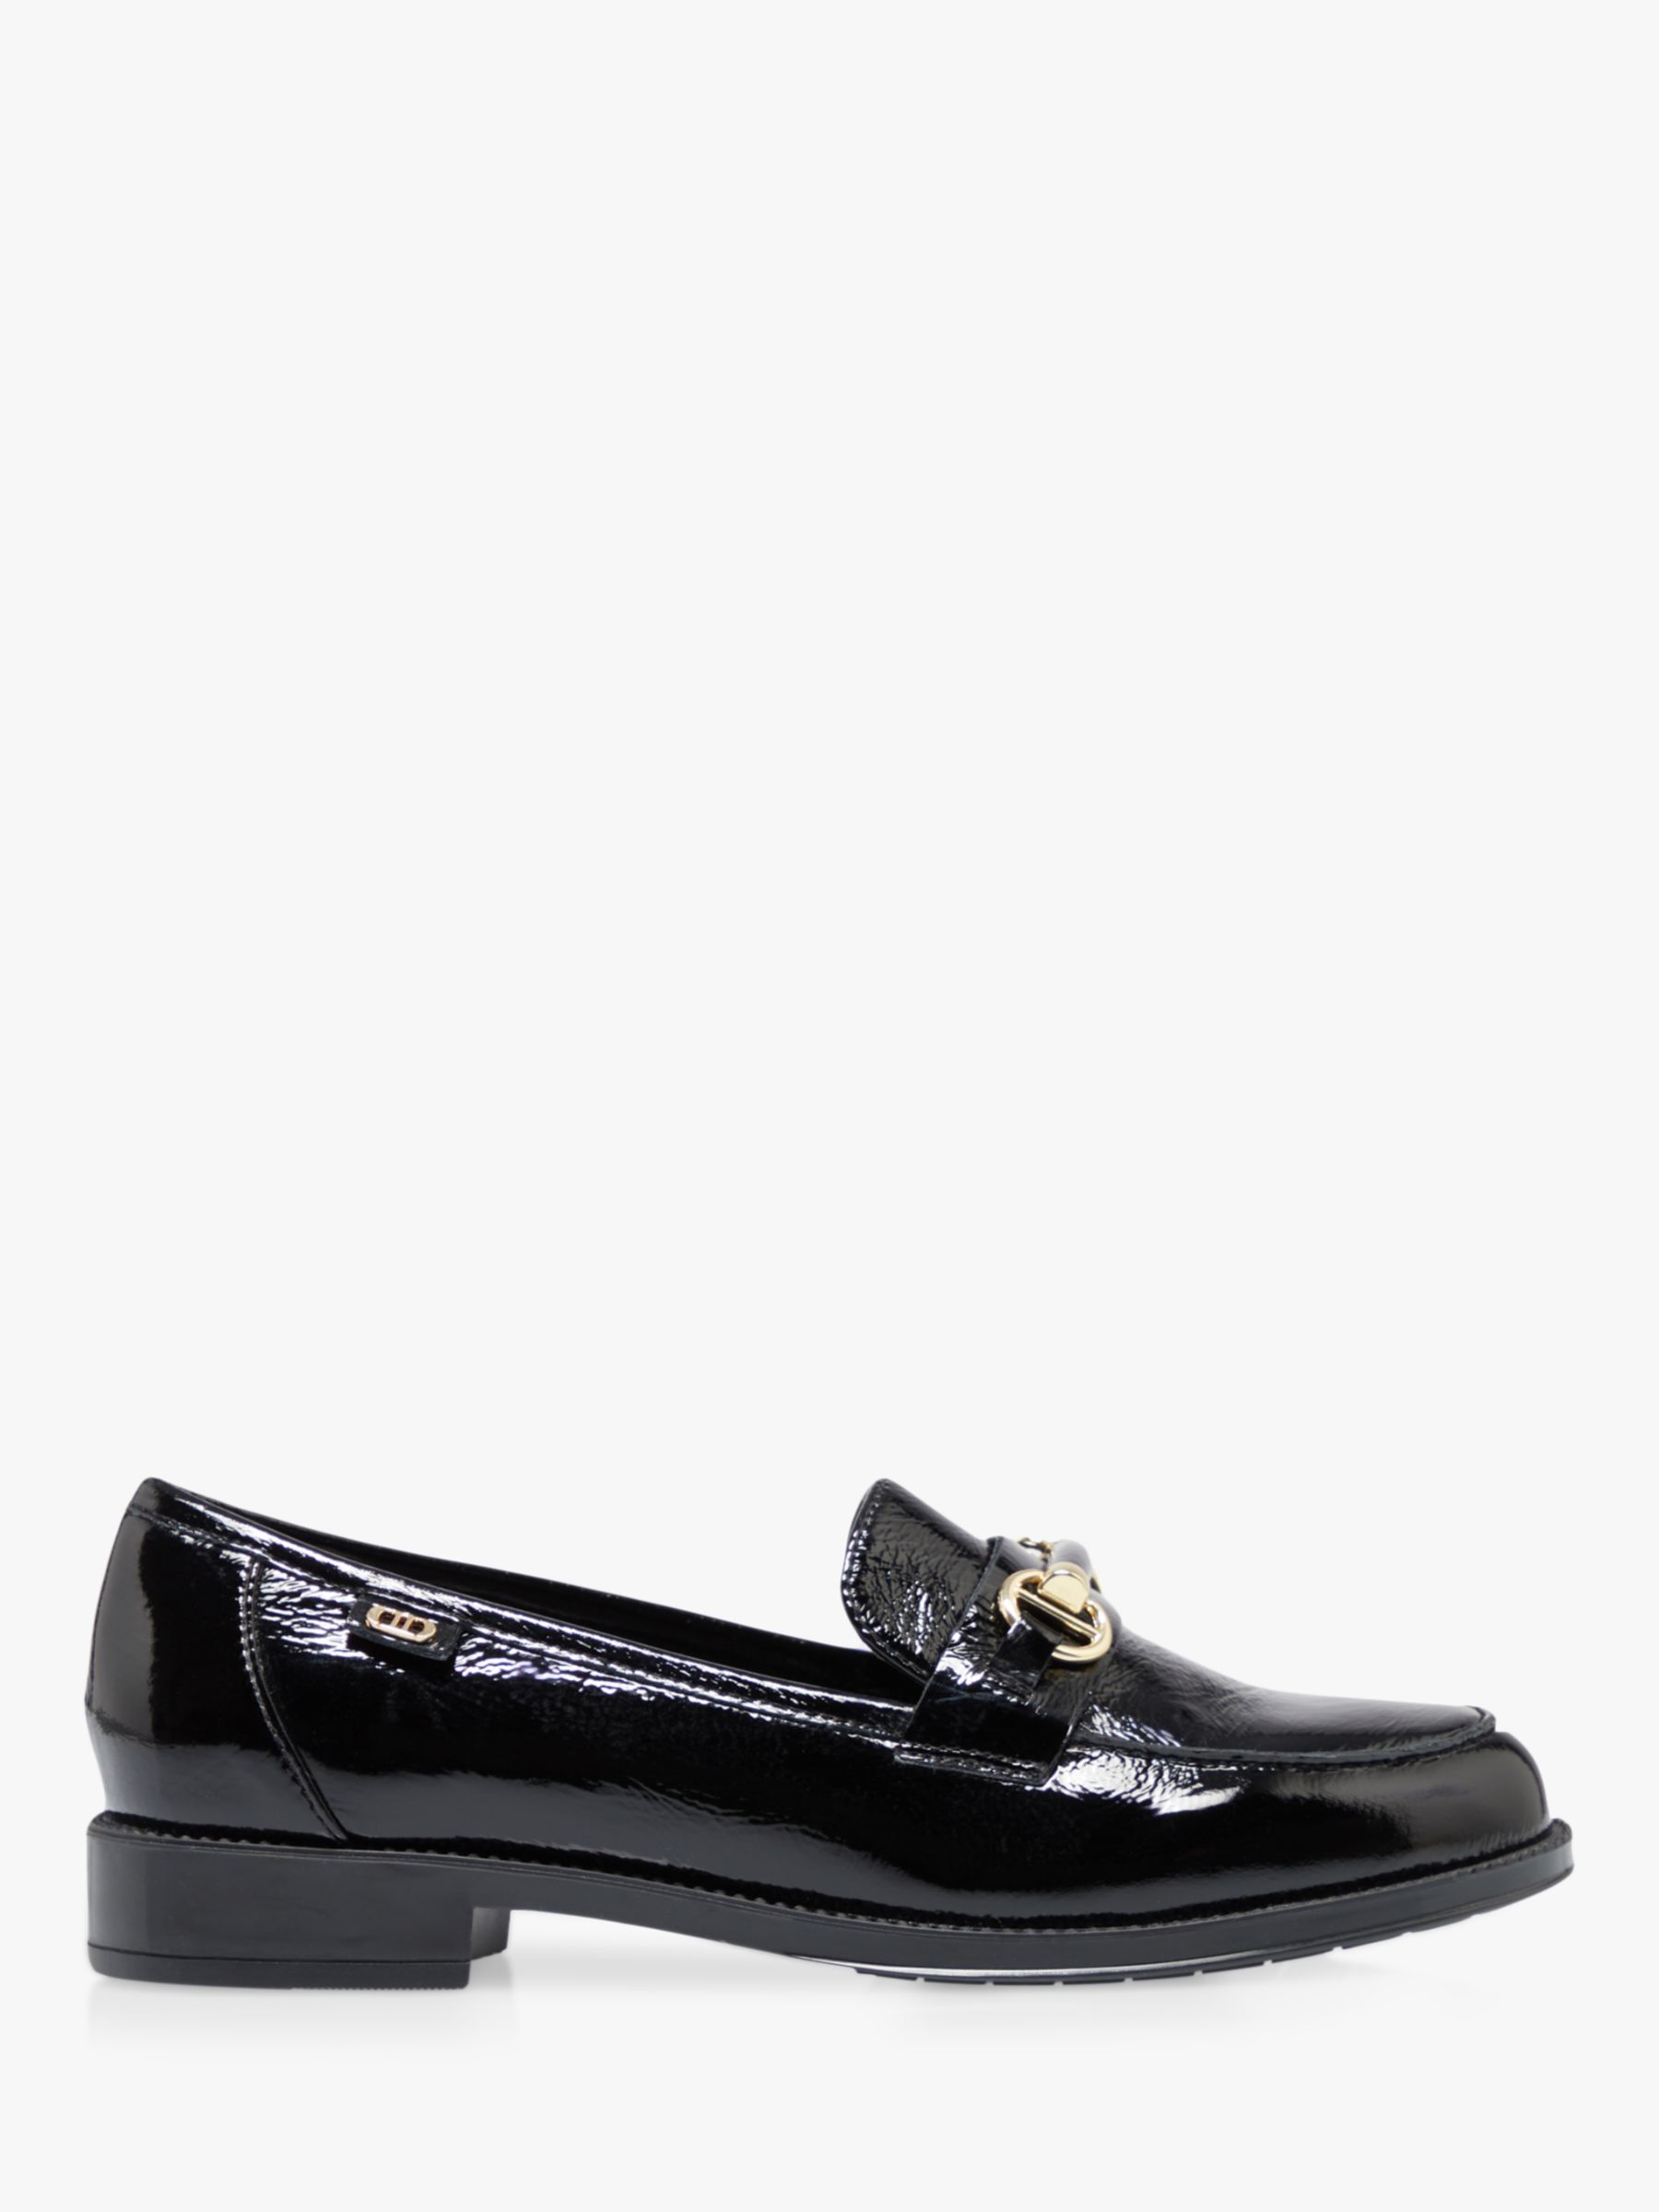 Dune Guys Leather Loafers, Black